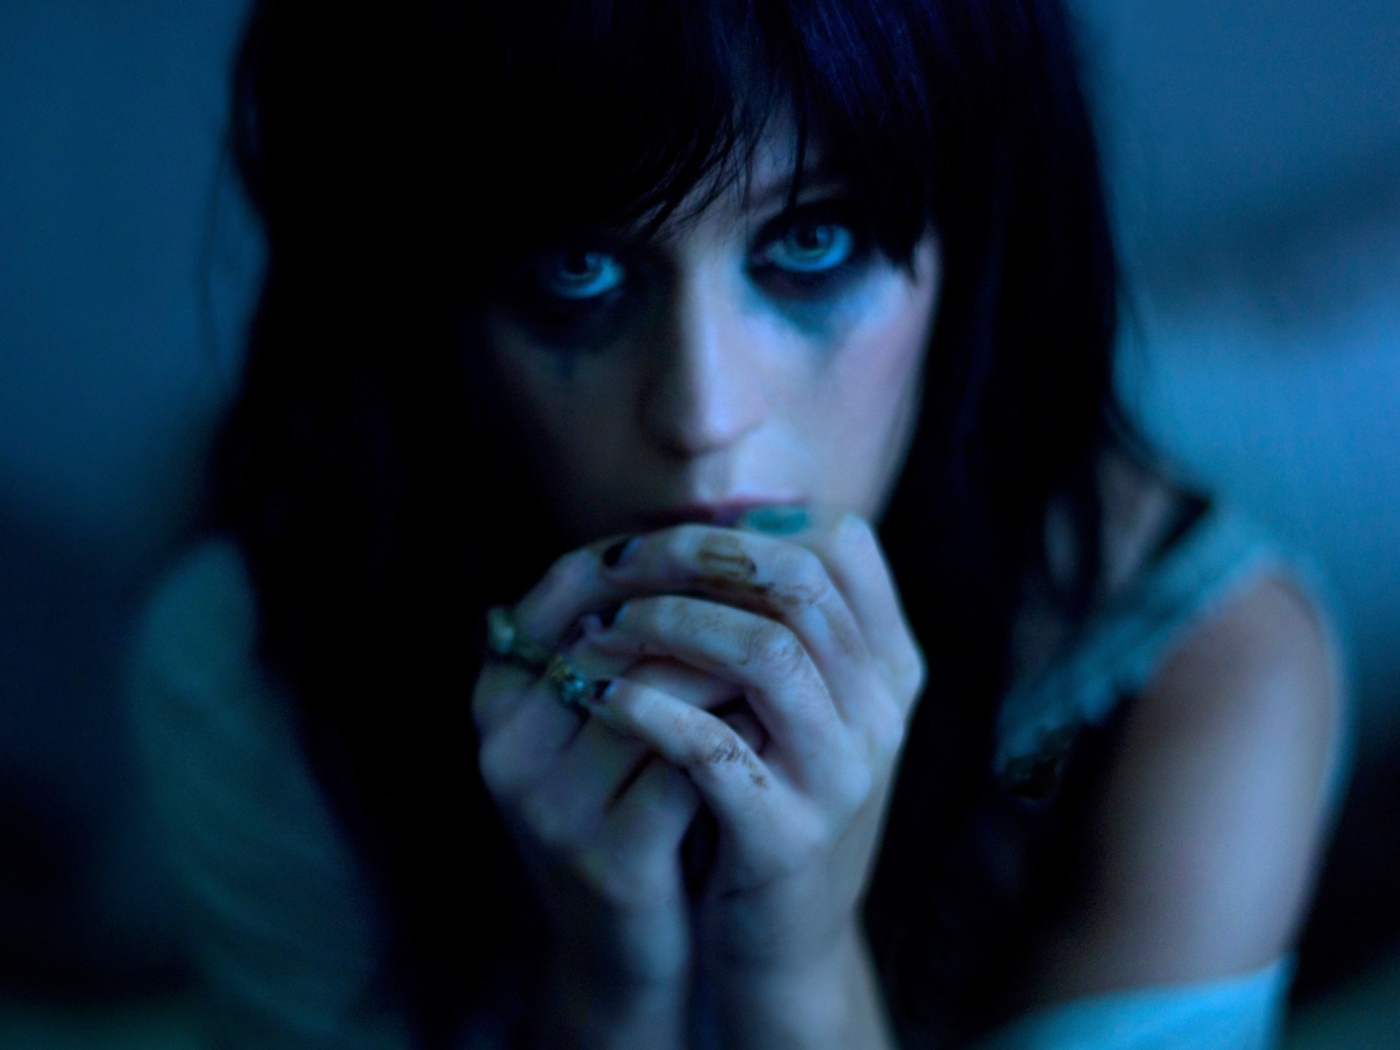 Katy Perry - The One That Got Away wallpaper 1400x1050